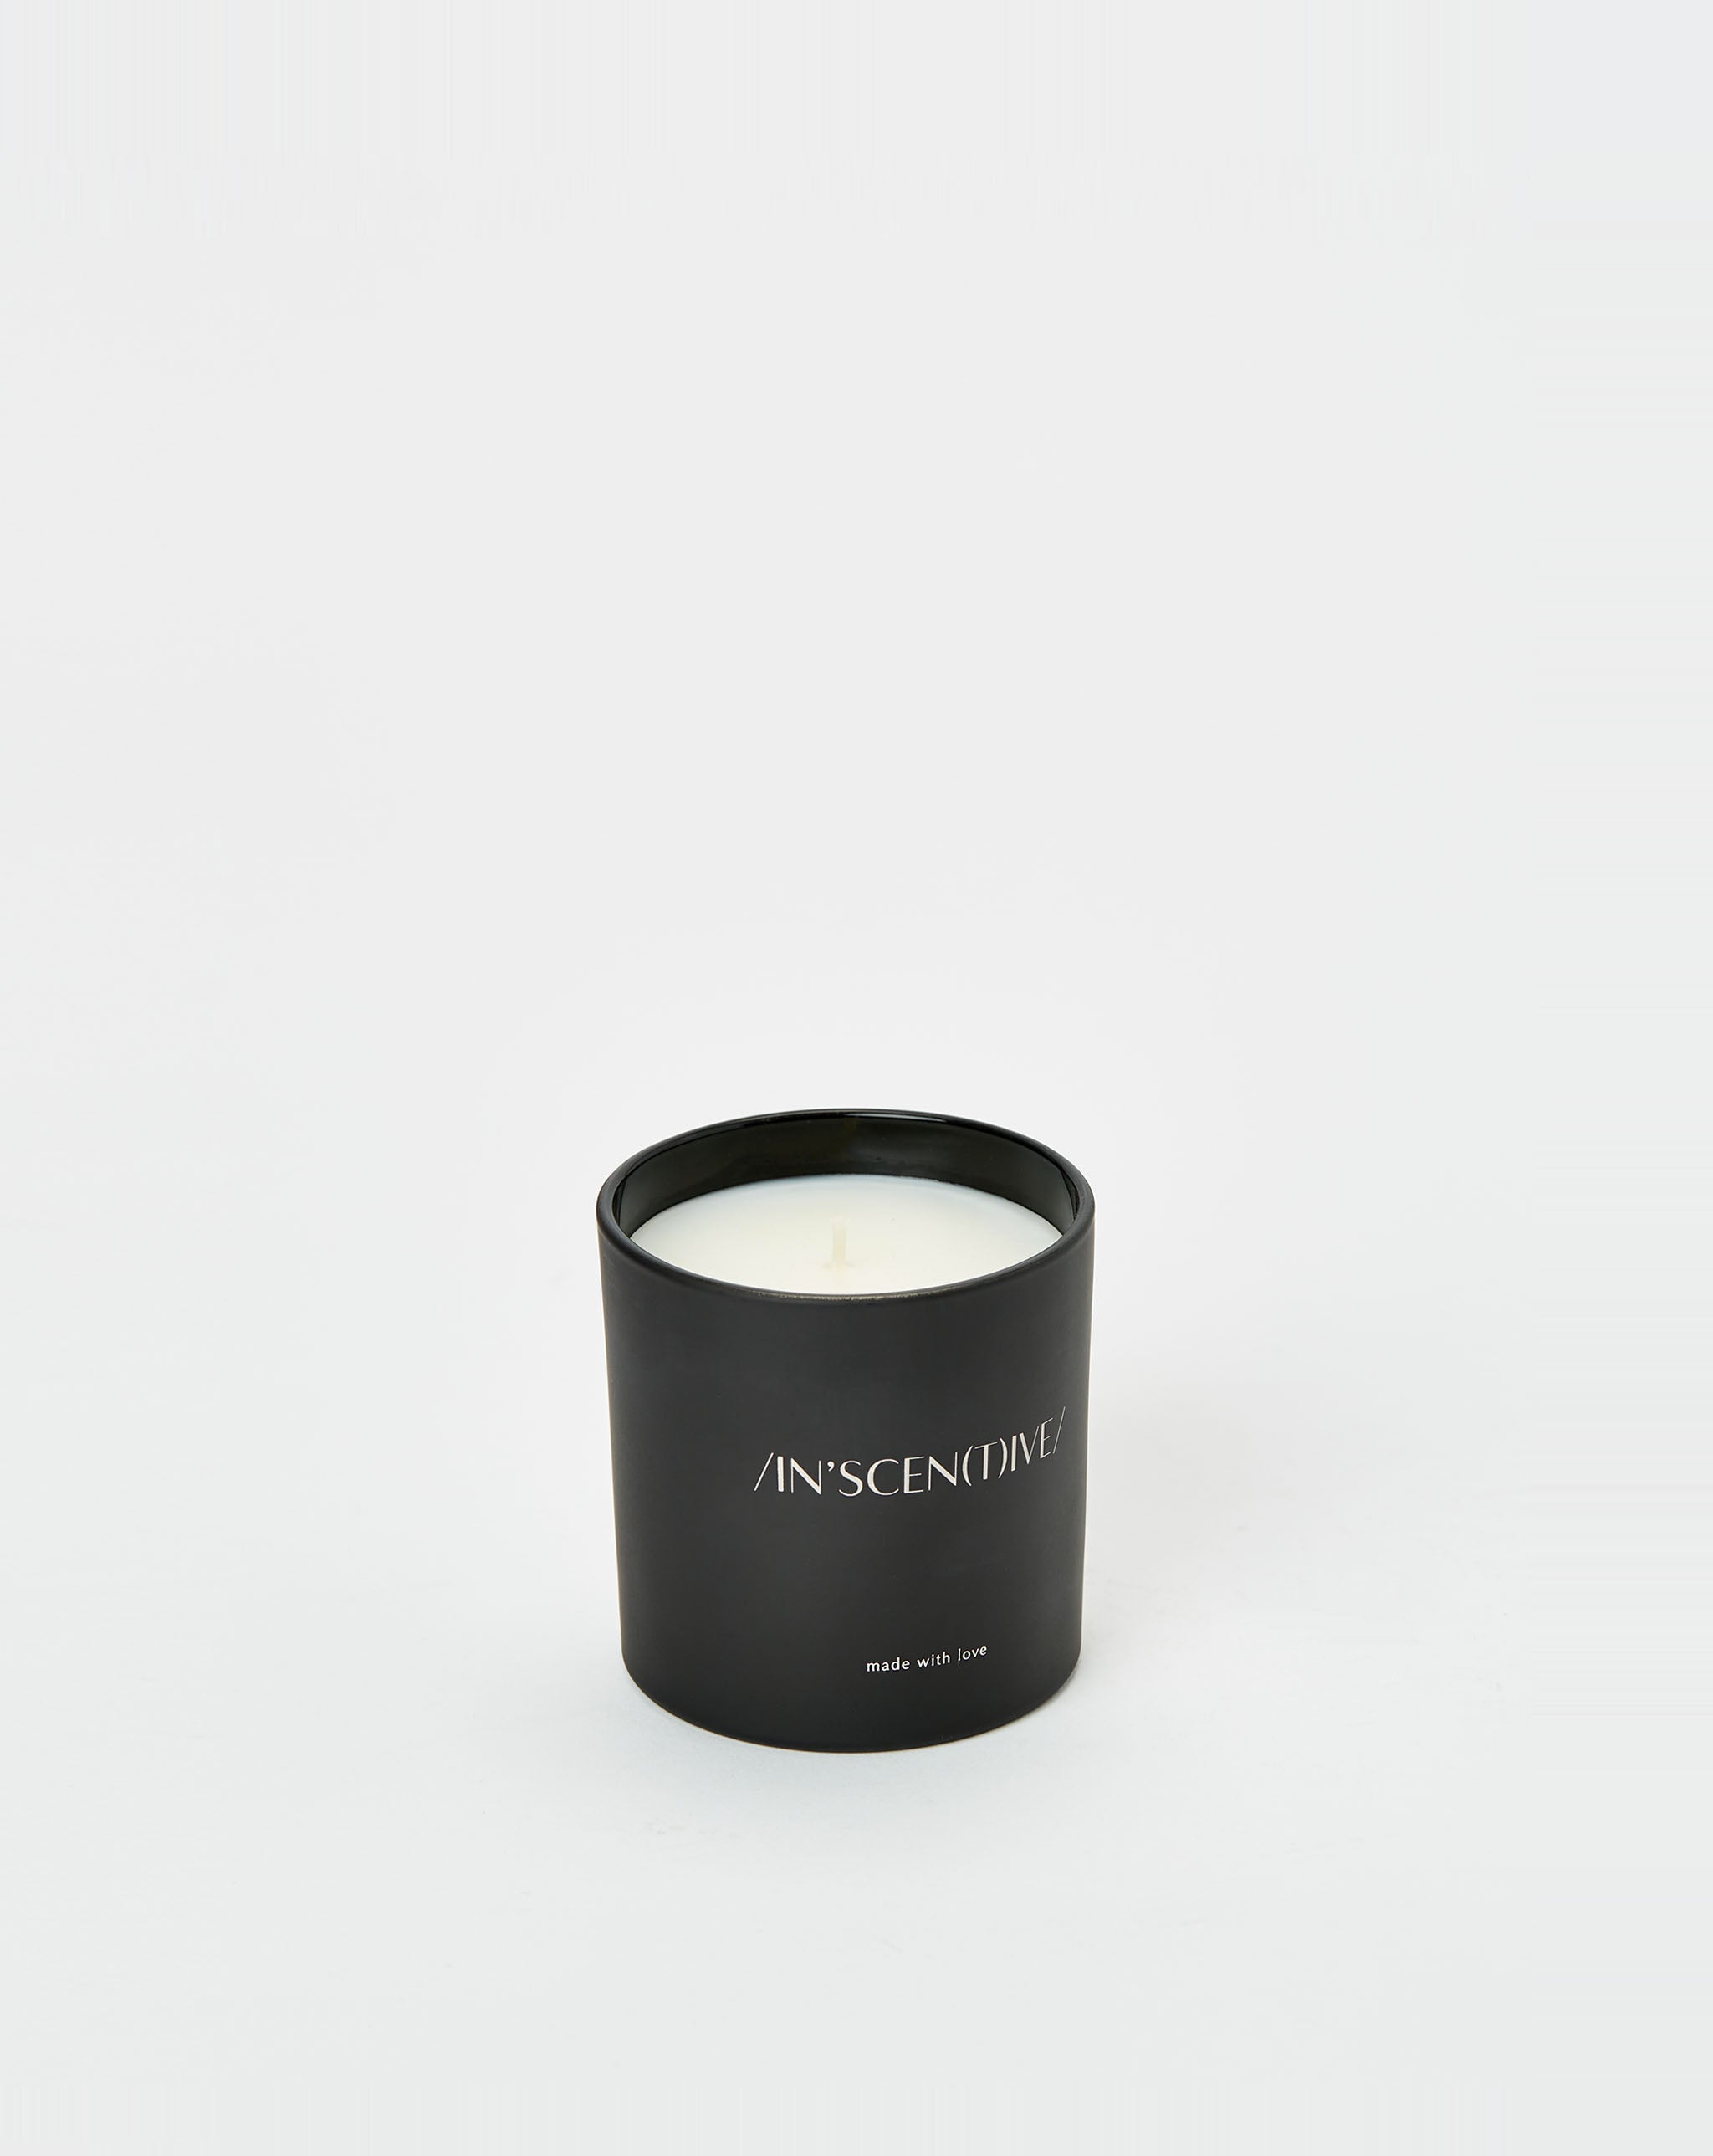 /IN'SCEN(T)IVE/ Rooted Candle  - Cheap Cerbe Jordan outlet